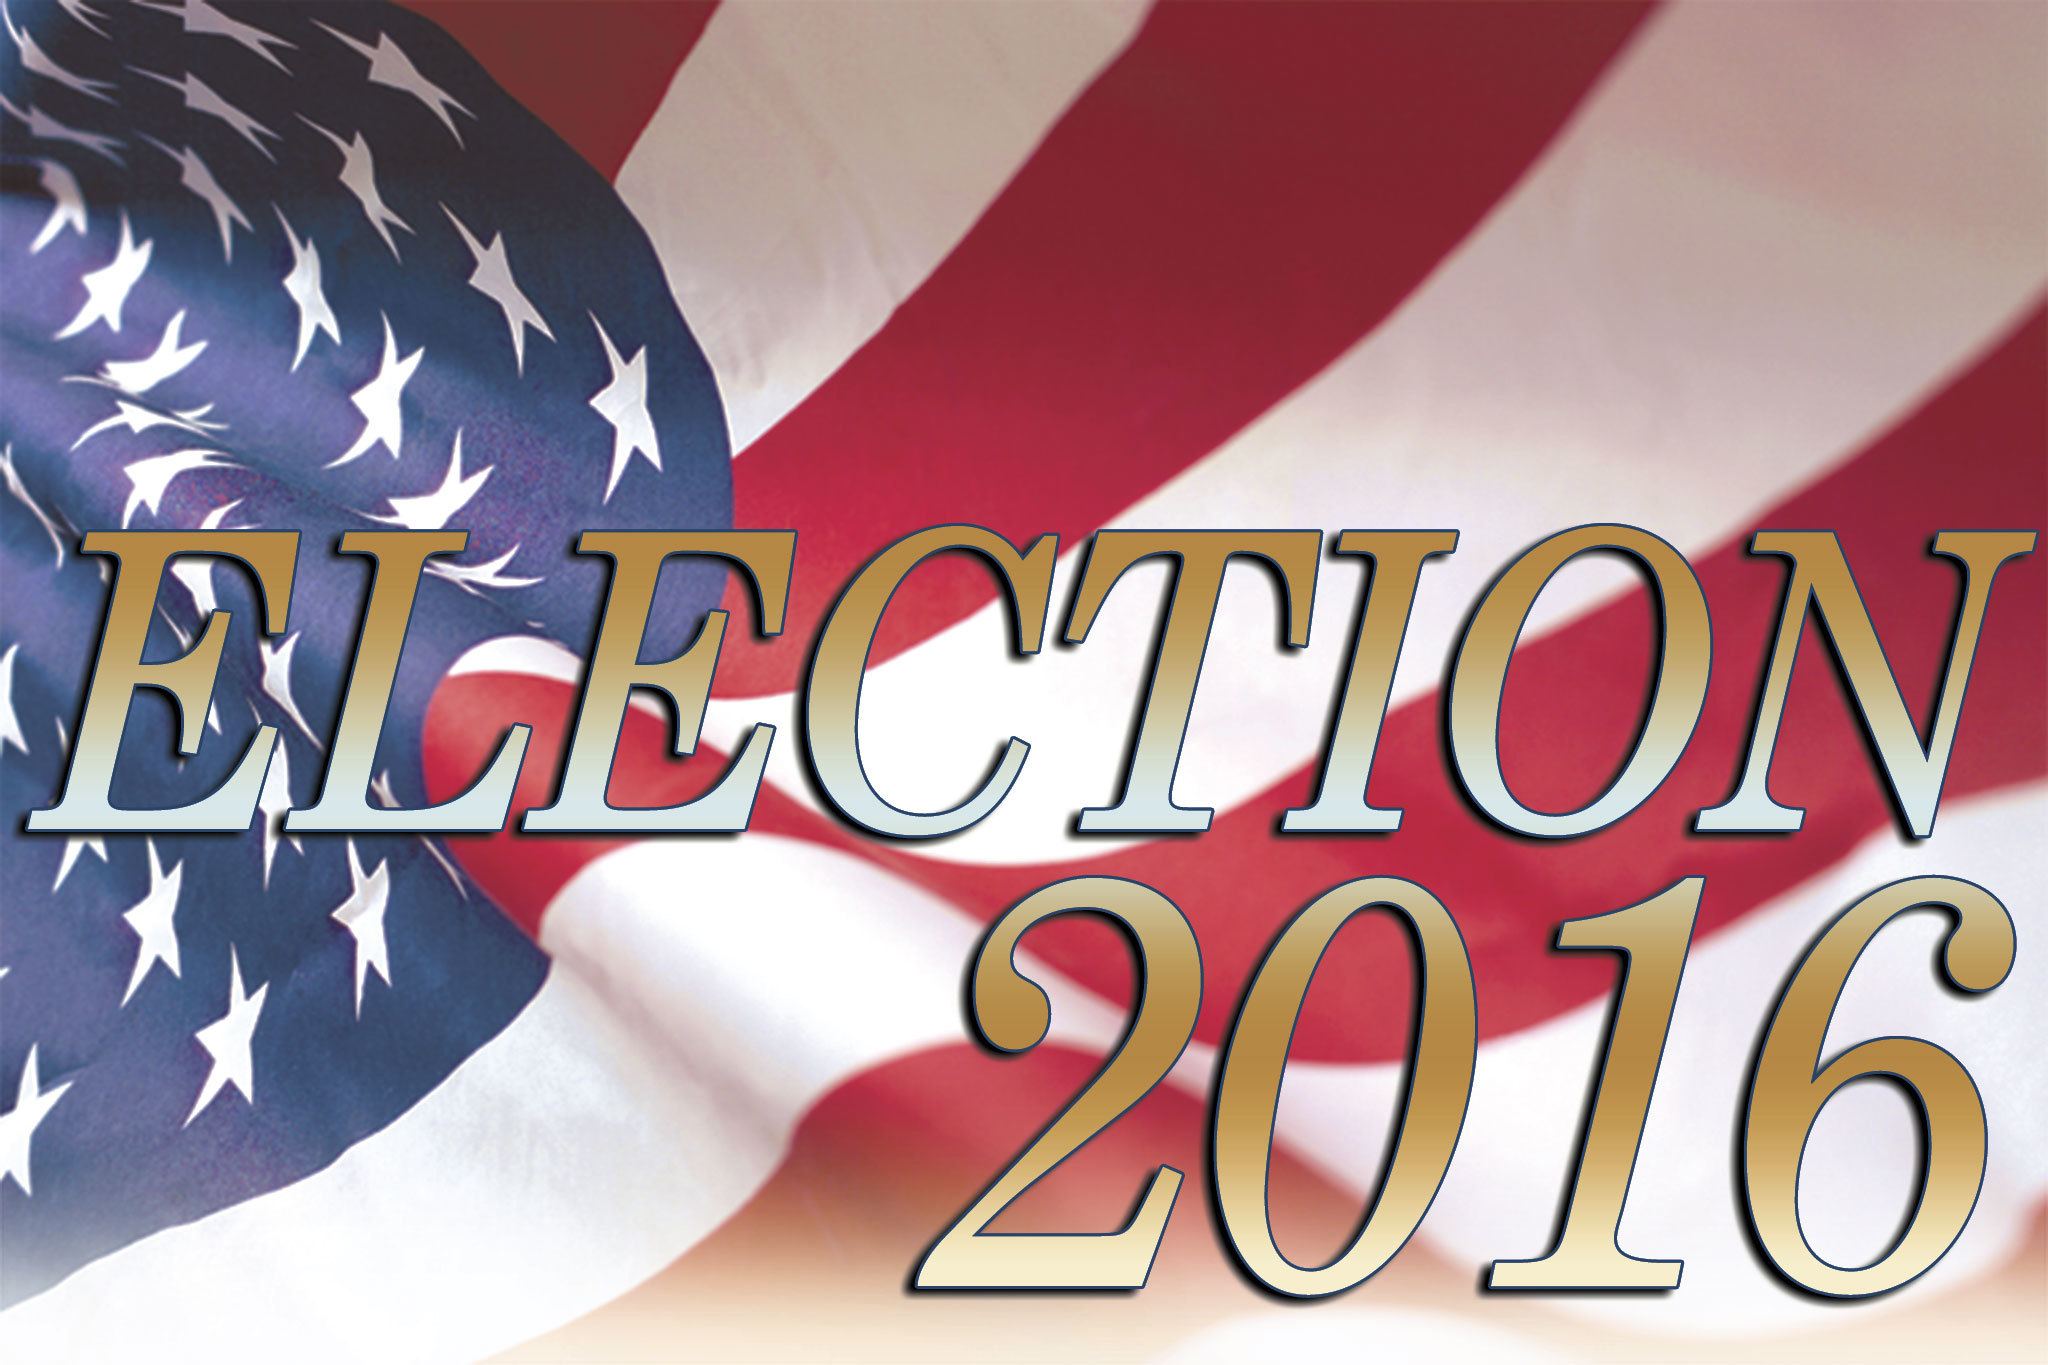 General election: Johnson, Coughenour lead in Clallam County races